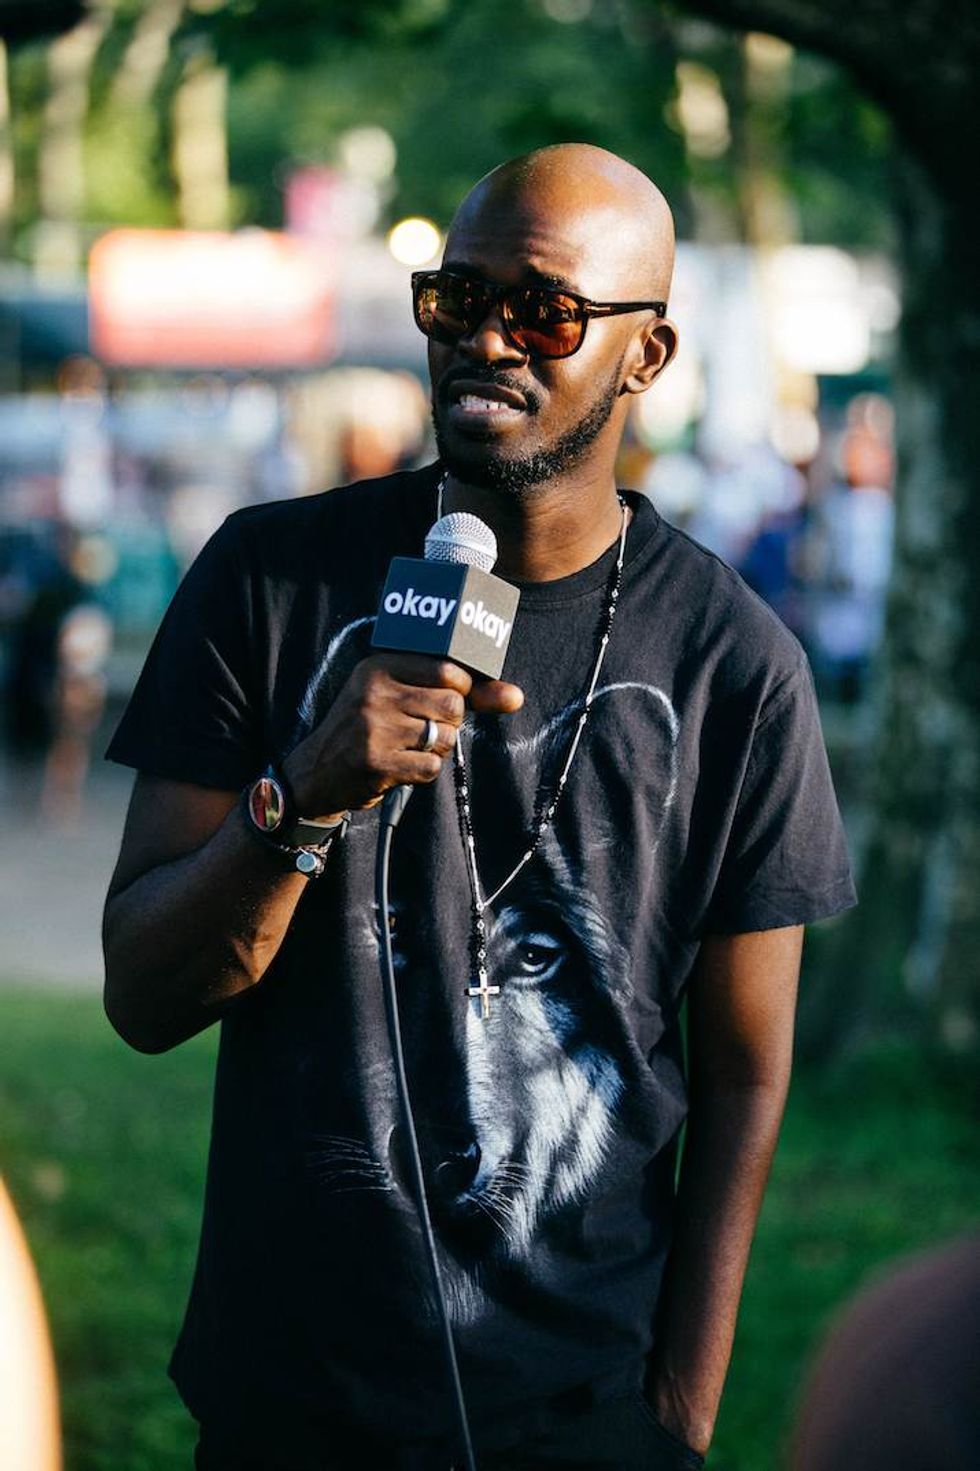 Watch The Story Of Black Coffee's 'Origins' In A New Mini-Doc From RA & SONOS